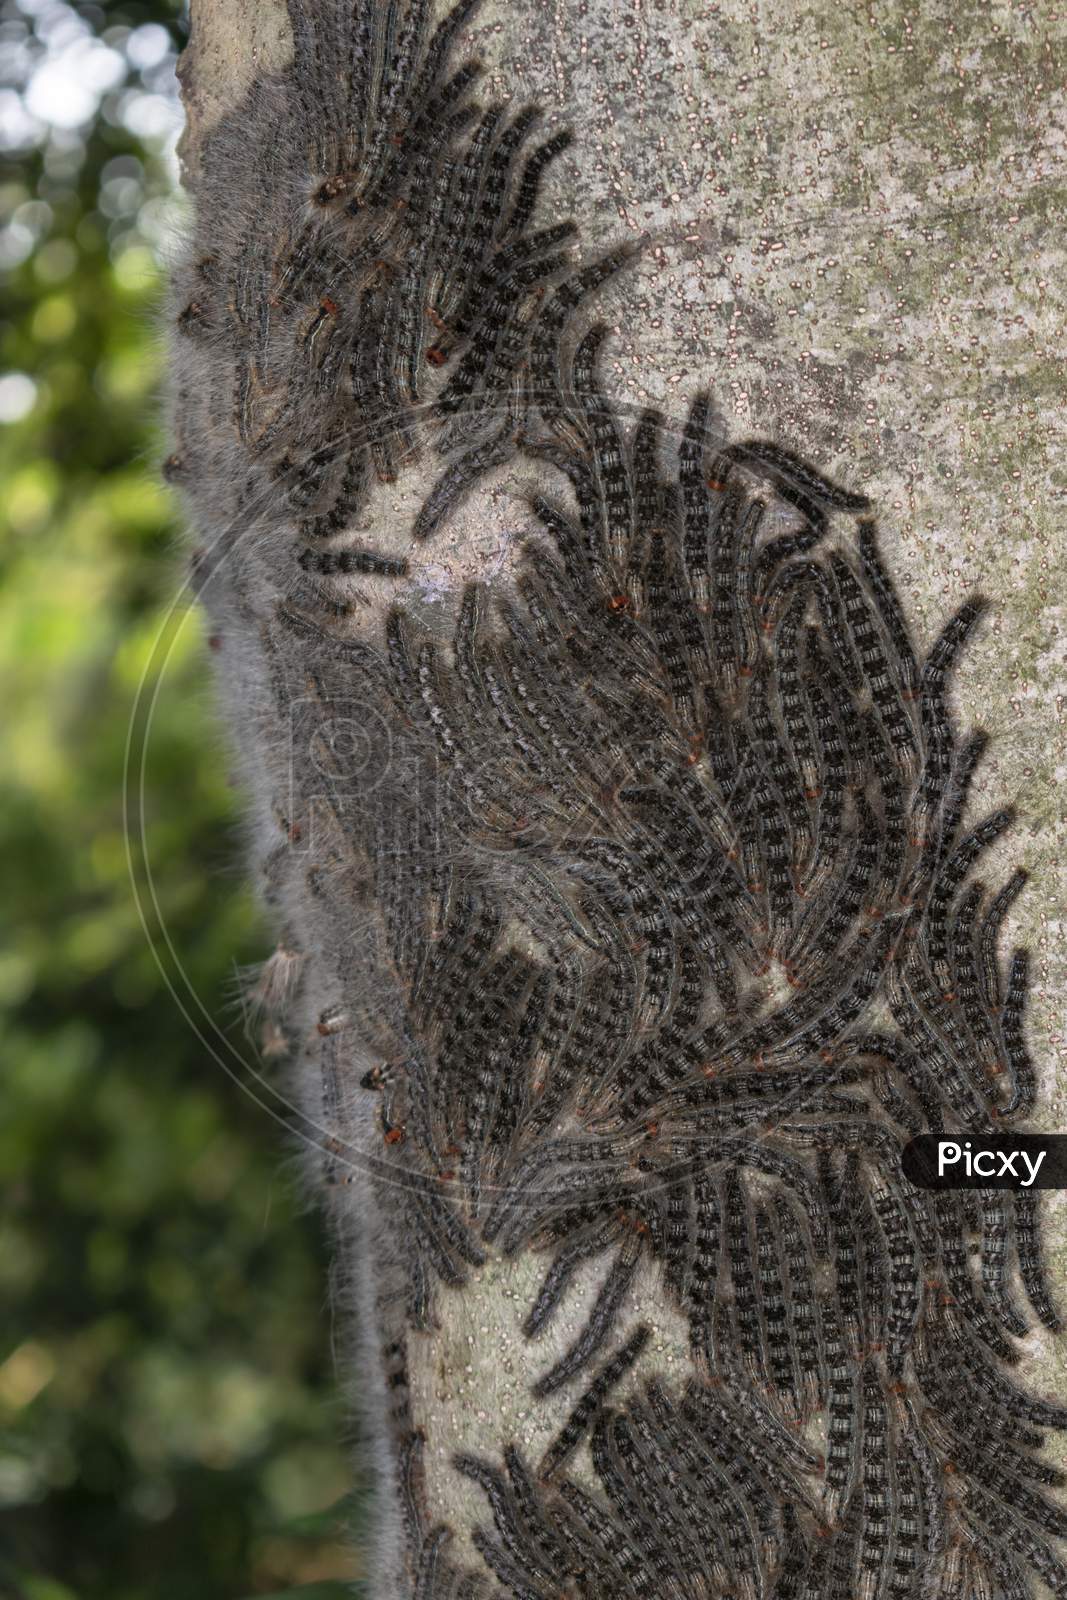 There Are Many Caterpillars Nesting Together On A Tree Trunk In The Forest. Selective Focus